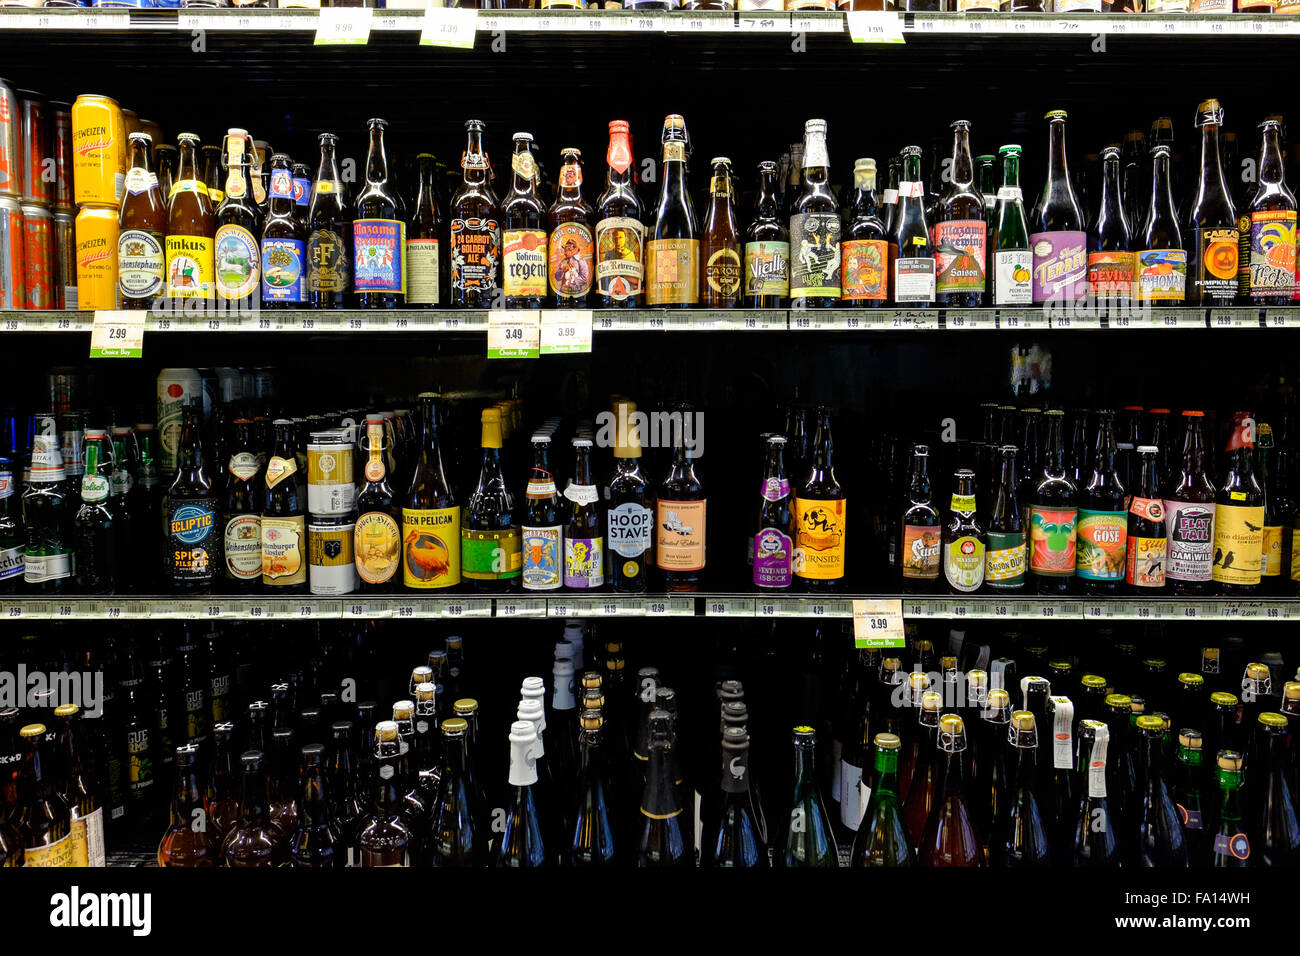 https://c8.alamy.com/comp/FA14WH/eugene-or-december-16-2015-beer-selection-in-an-open-cooler-at-market-FA14WH.jpg